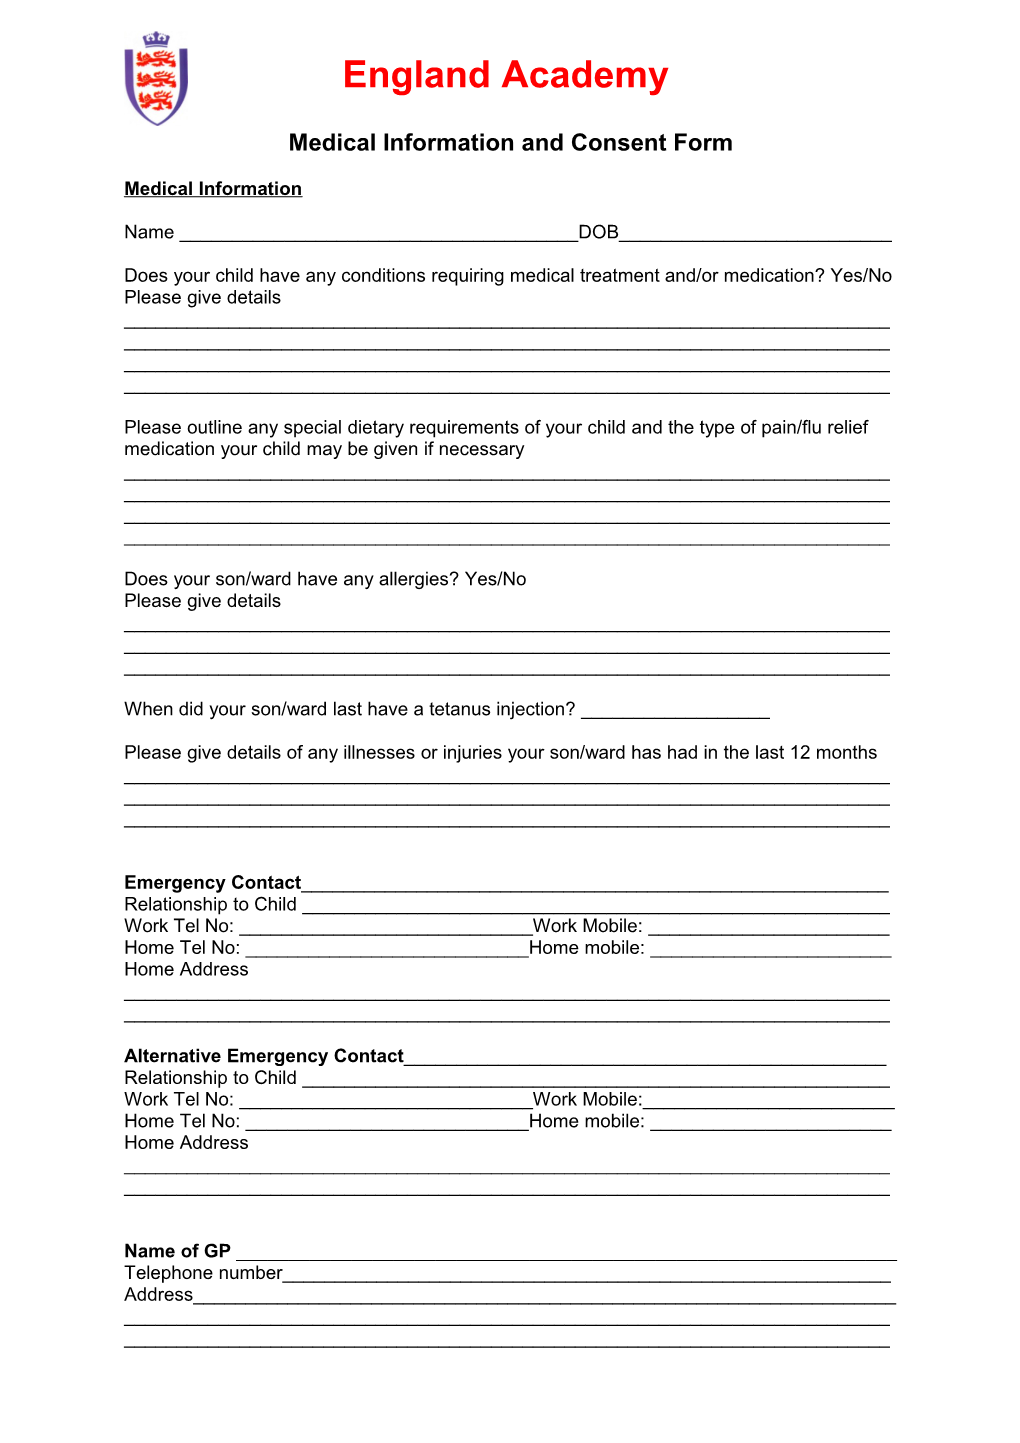 Medical Information and Consent Form